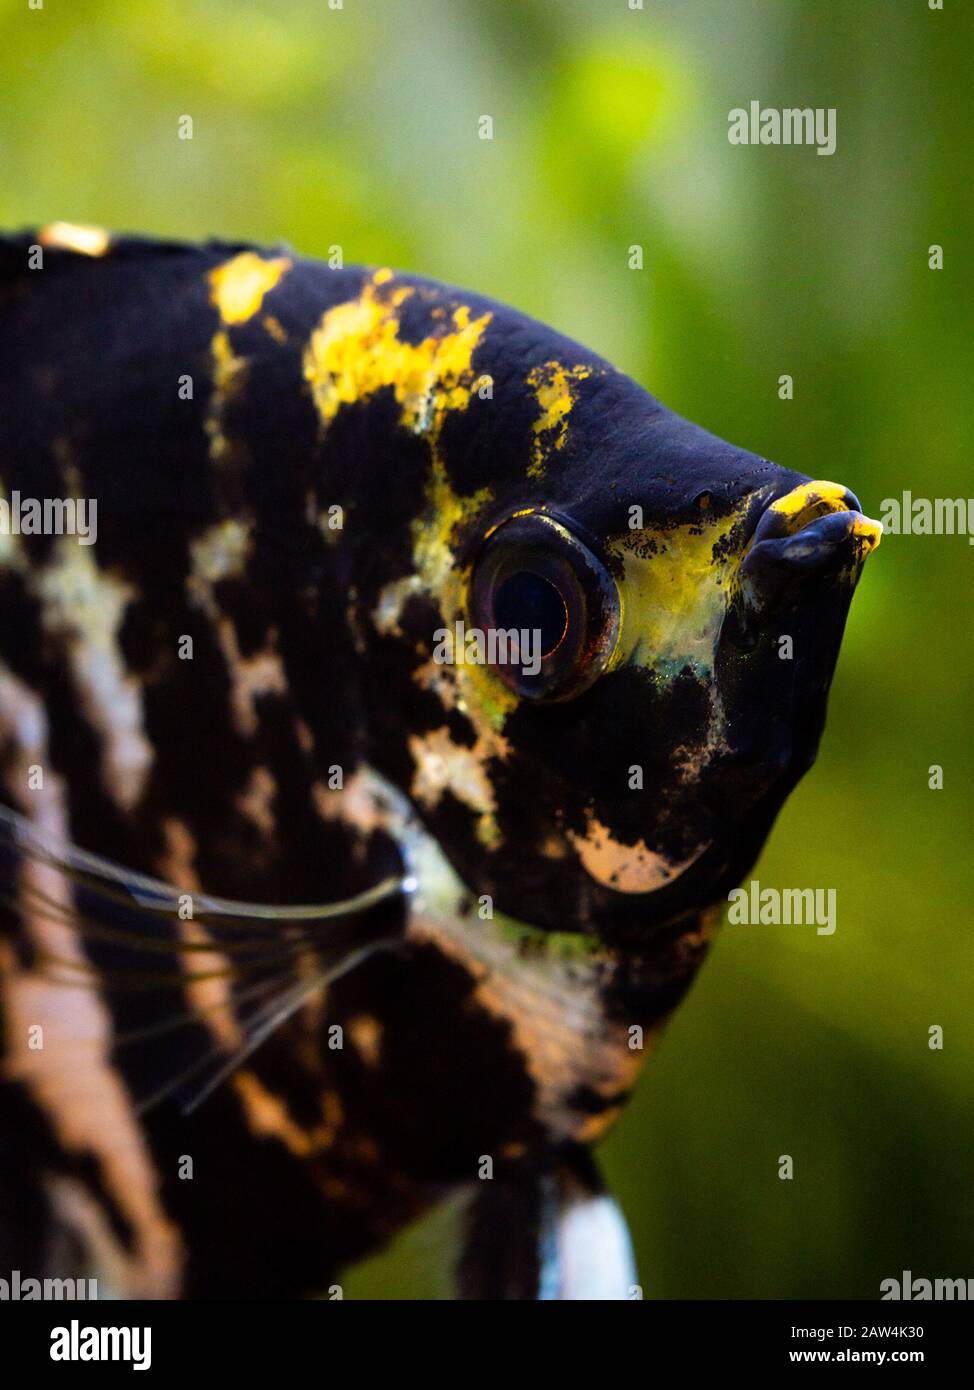 macro close up of a black and white angel fish in a fish tank with blurred background (Pterophyllum scalare) Stock Photo